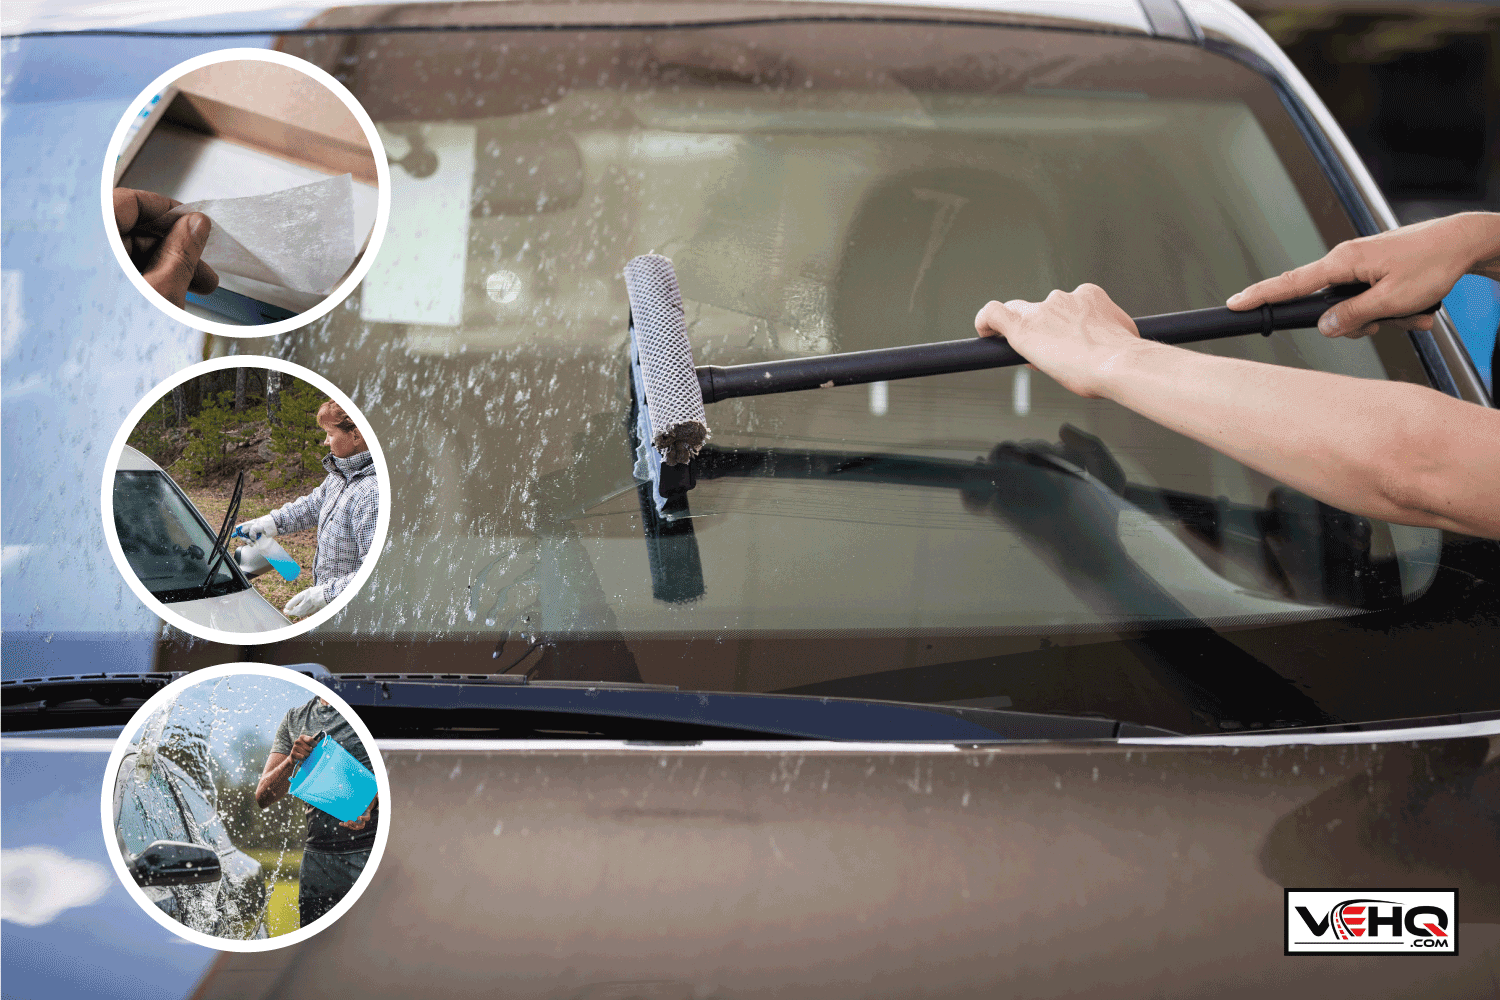 girl washes the windshield of the car at a gas station. dryer sheets in box. woman spraying on car. man rinsing car with water from bucket. How To Get Bugs Off Car With Dryer Sheets